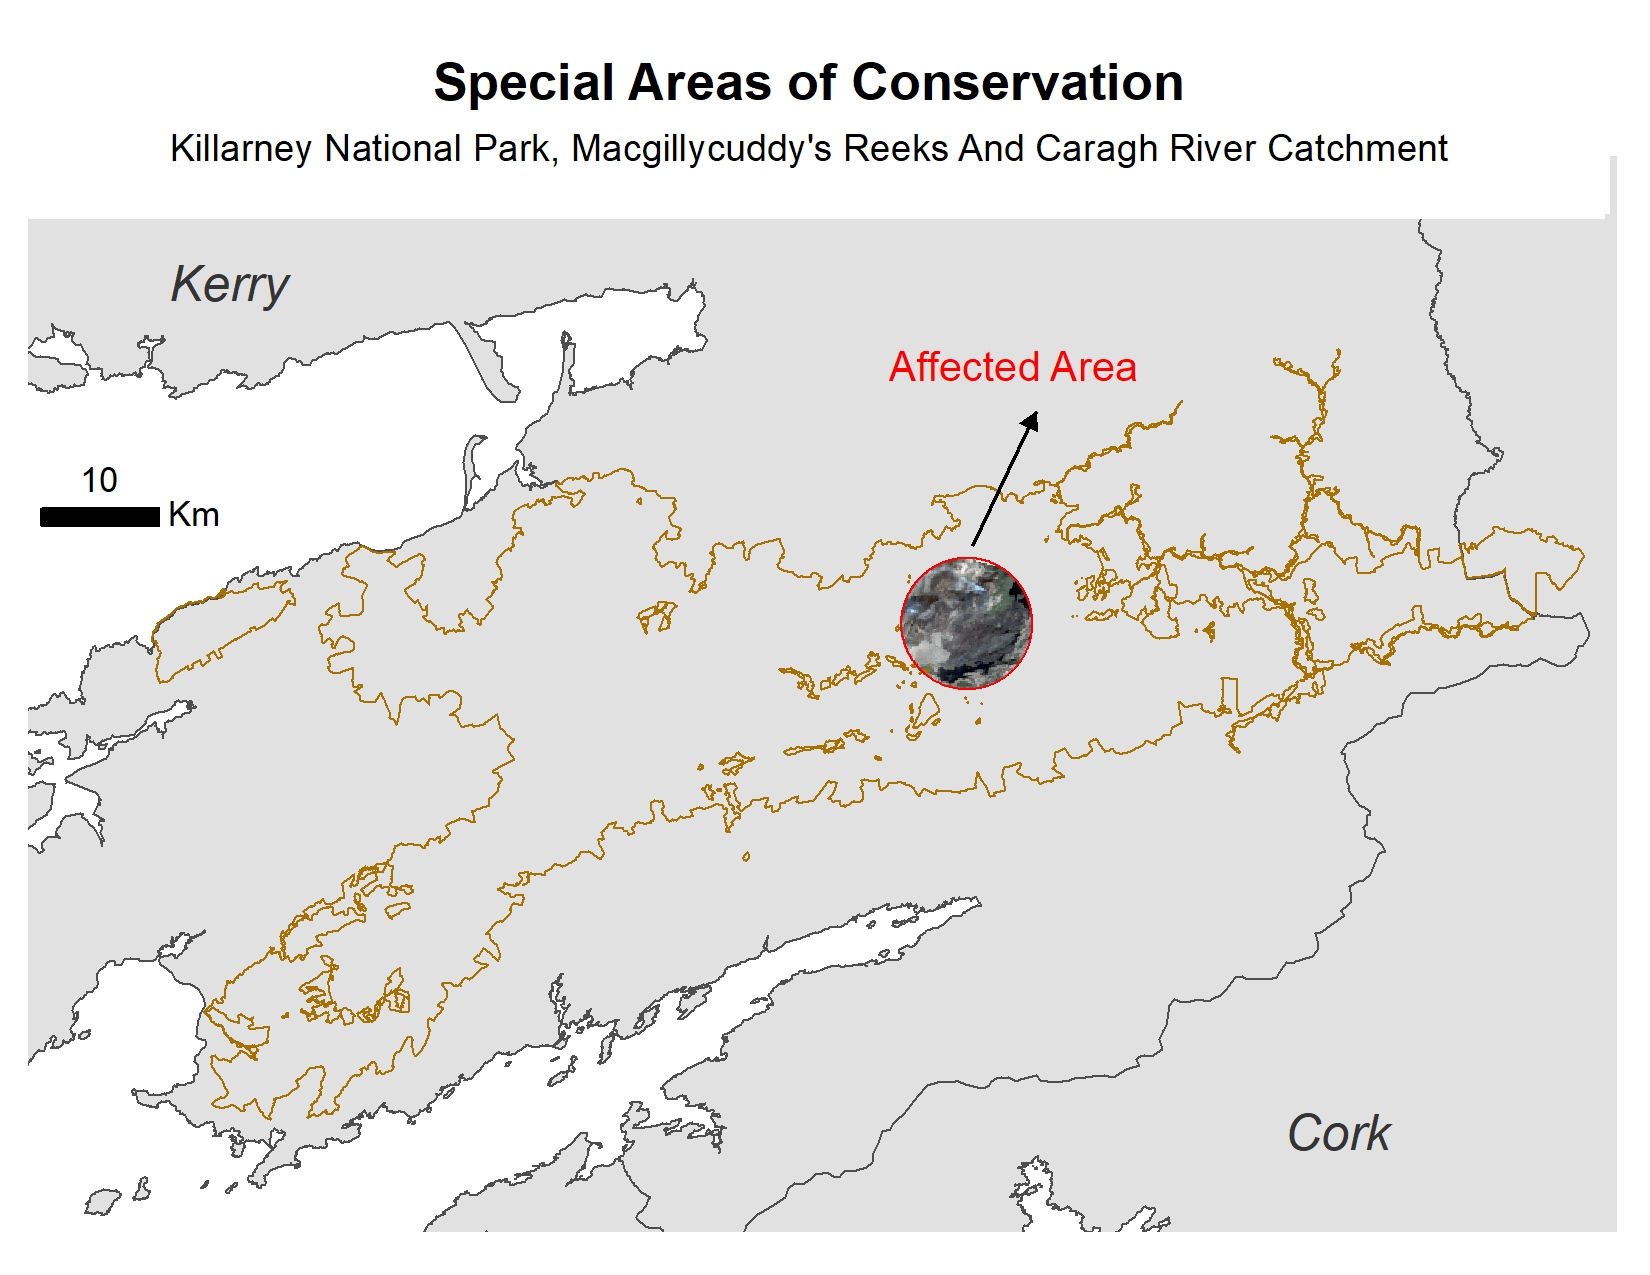 Special Area of Conservation - Killarney National Park, Macgillycuddy's Reeks and Caragh River Catchment